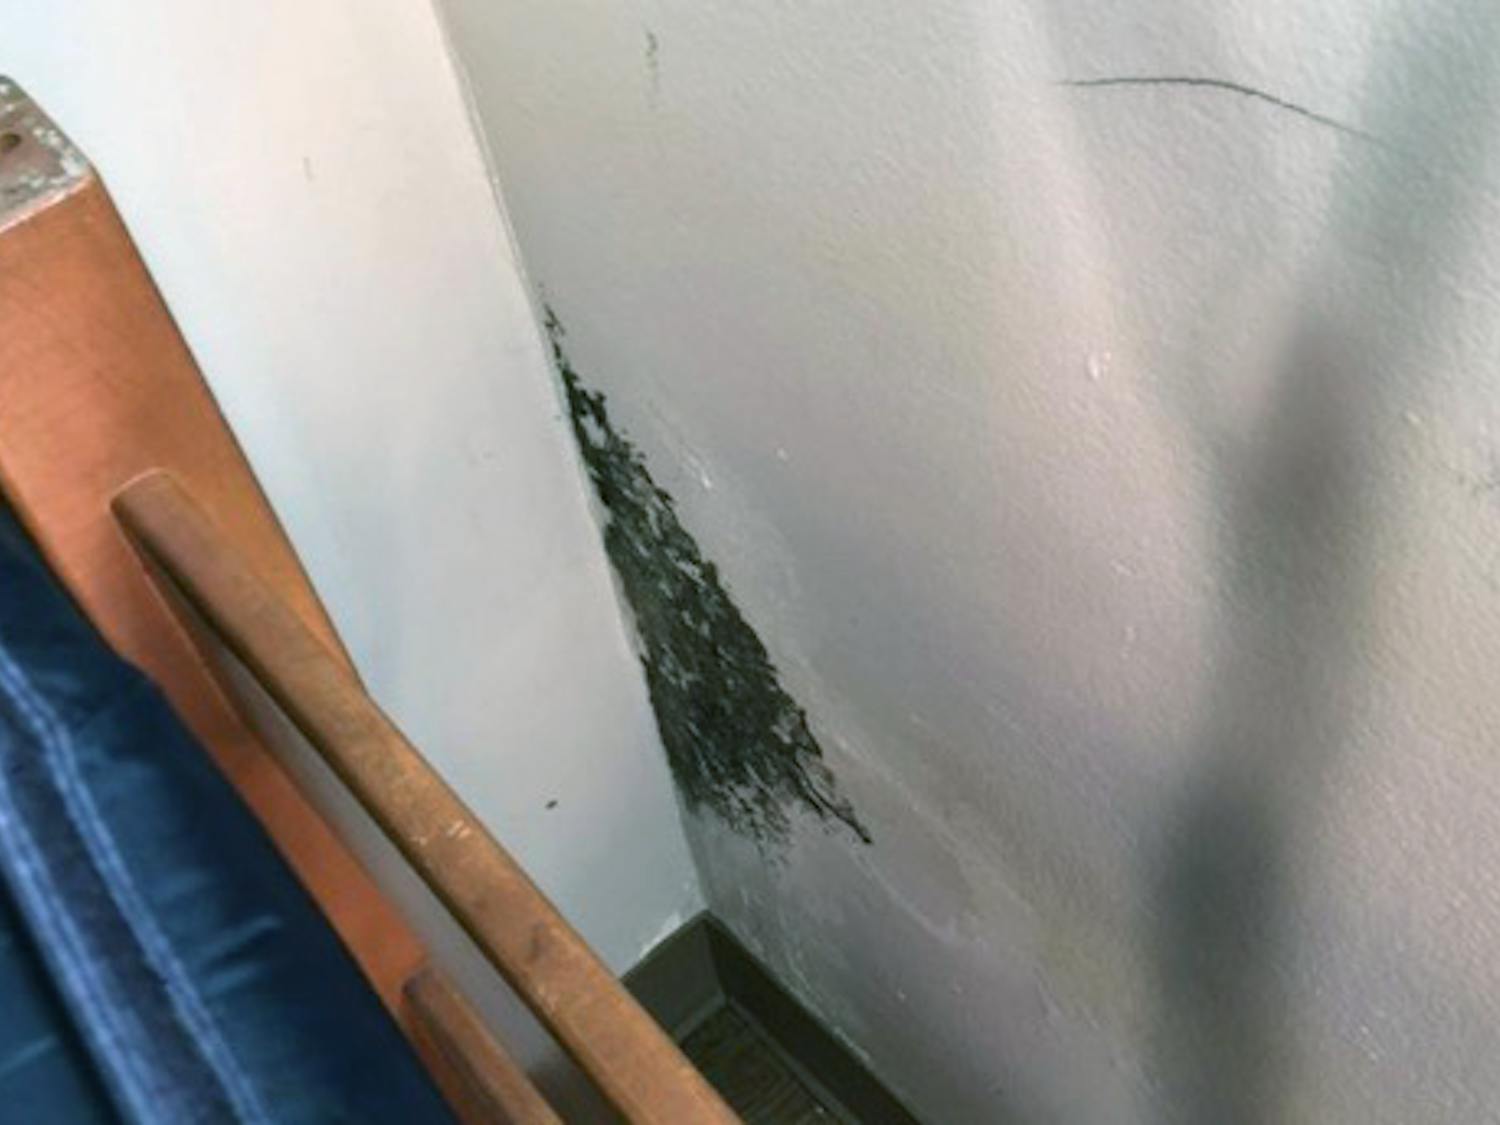 Mold growing behind a bed in Capstone House during spring 2022. Second-year criminal justice student Leah Camilli was constantly sick her freshman year and only found the square foot of mold behind her bed during move-out.